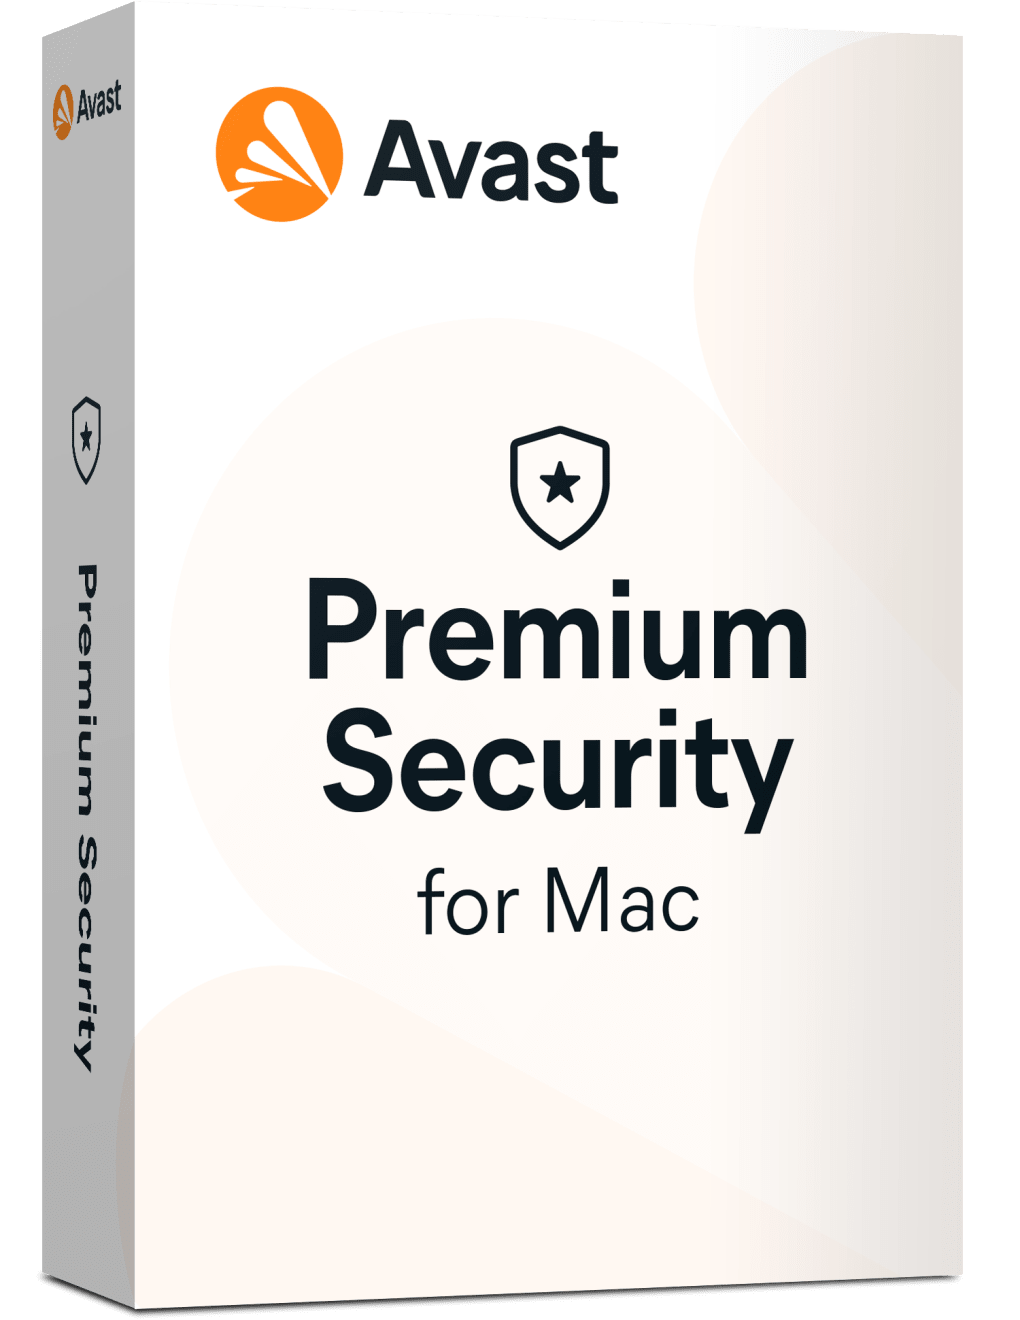 download avast pro full version with crack for windows 8.1